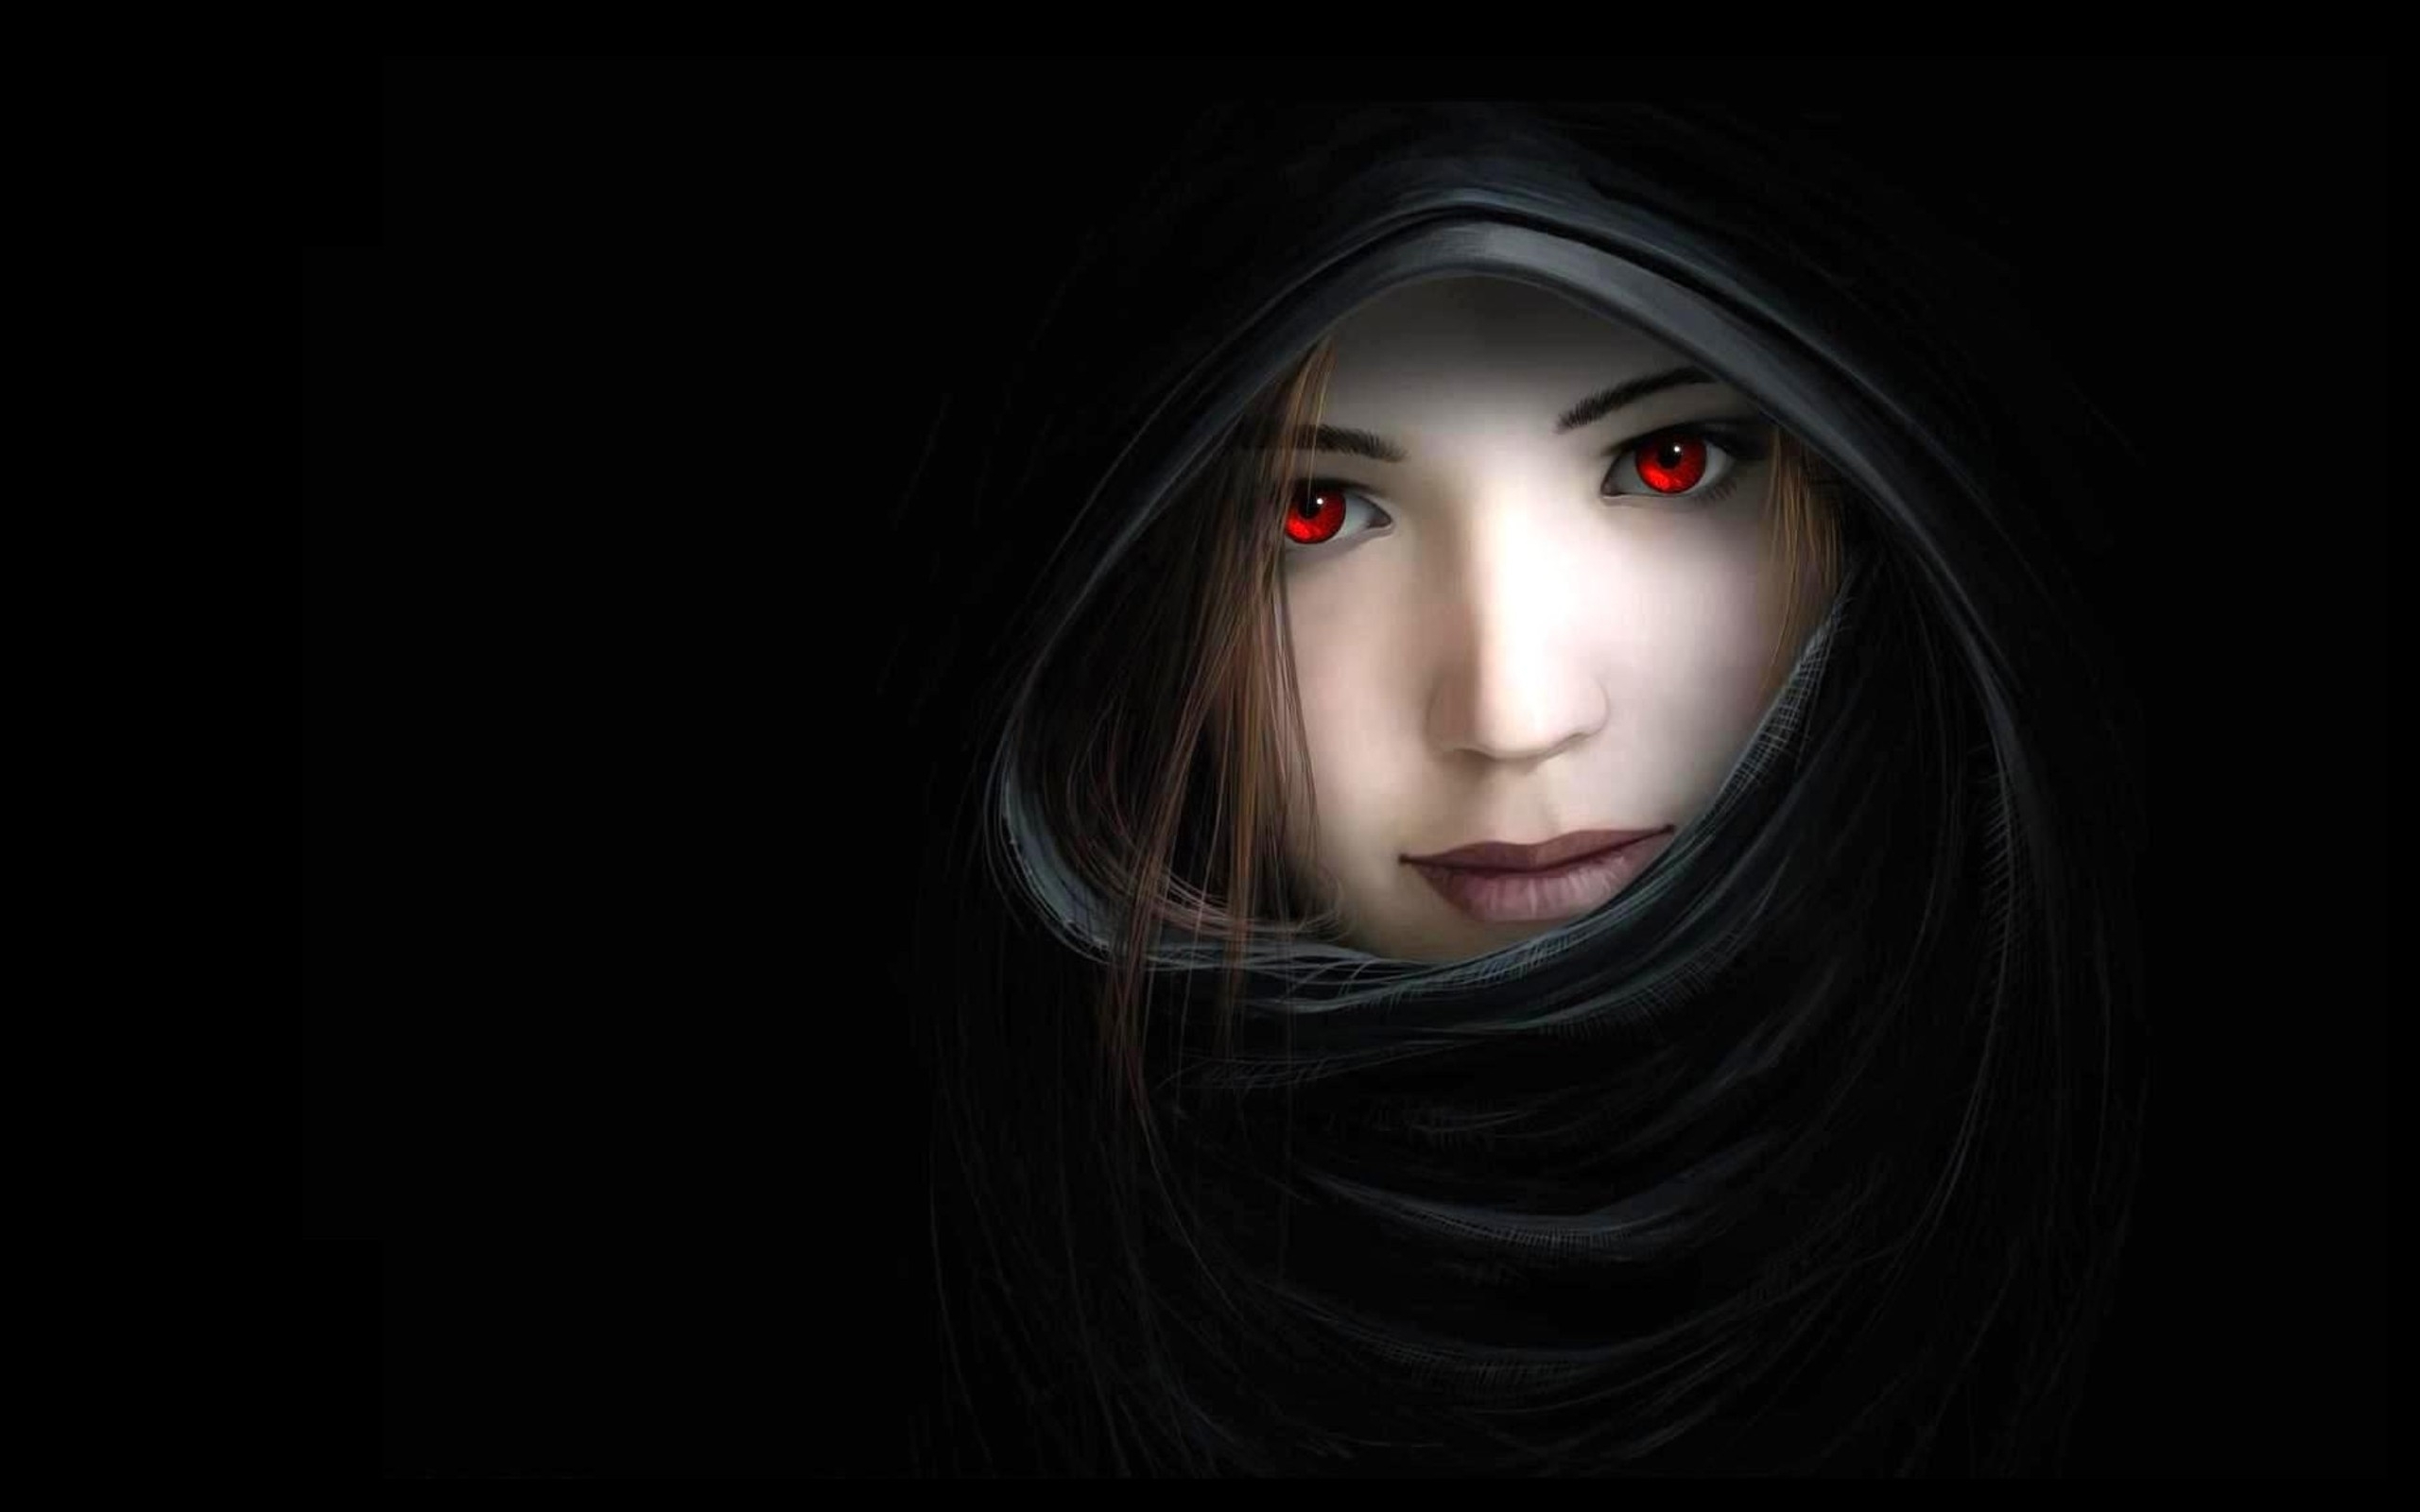 women, Dark, Mouth, Red, Eyes, Artwork, Noses, Hooded, Witches, Black, Background, 2560x1600, Wallpaper, Abstract, Arts, Hd Wallpaper